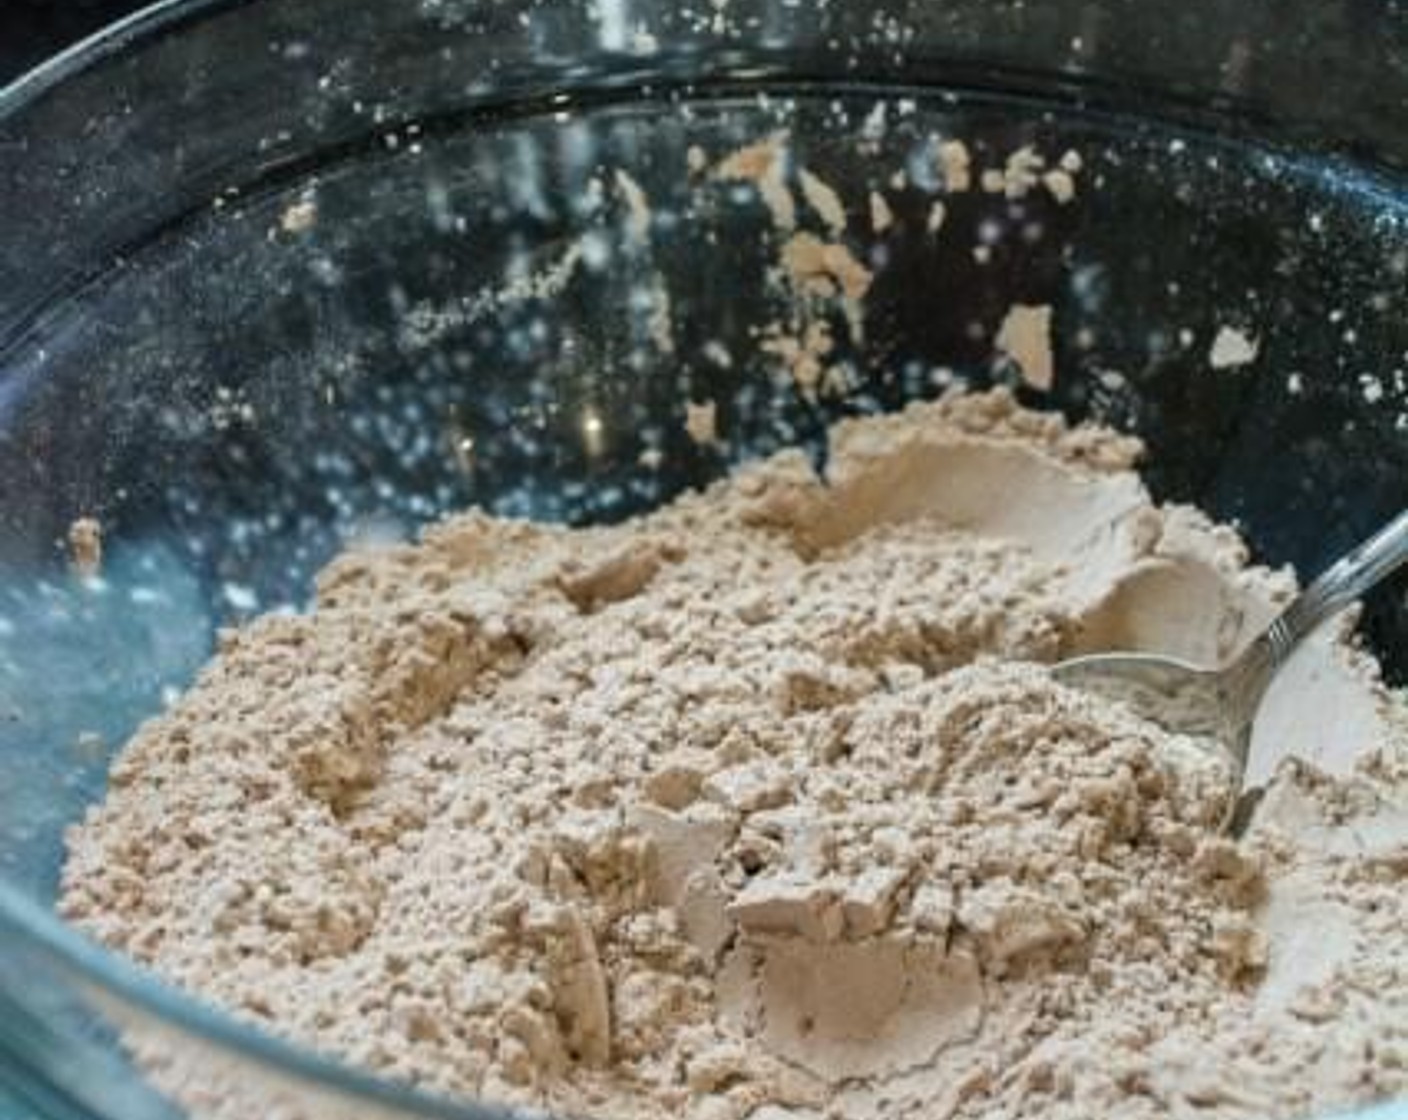 step 2 Whisk All-Purpose Flour (1 1/2 cups), Unsweetened Cocoa Powder (2 1/2 Tbsp), Baking Soda (1/2 tsp), and Salt (1/4 tsp) in a large bowl. Stir with a spoon to combine these ingredients.